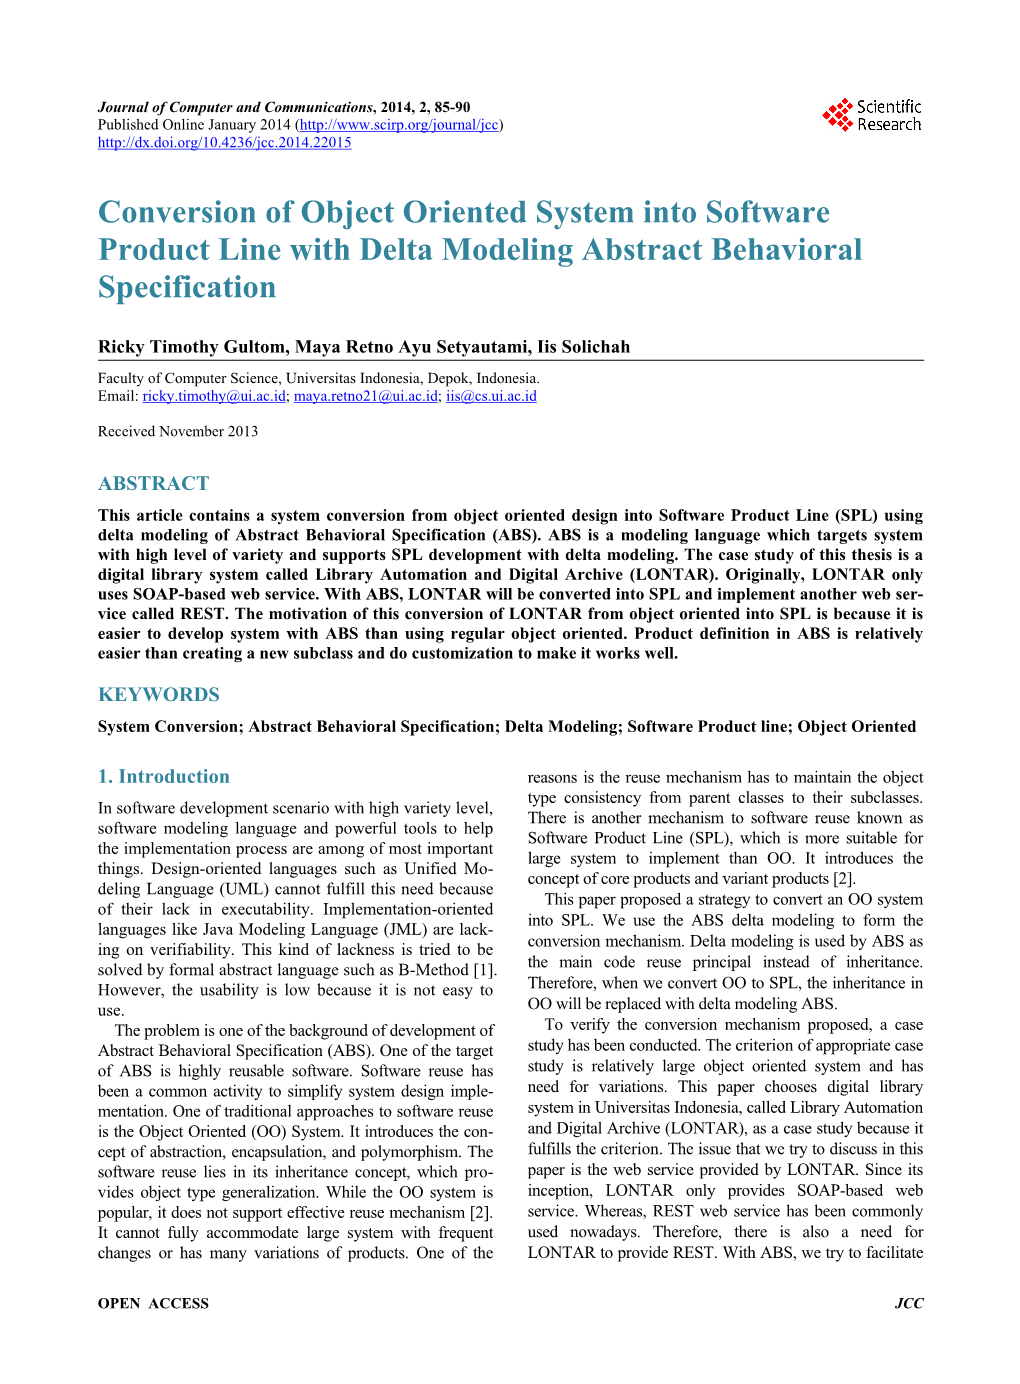 Conversion of Object Oriented System Into Software Product Line with Delta Modeling Abstract Behavioral Specification